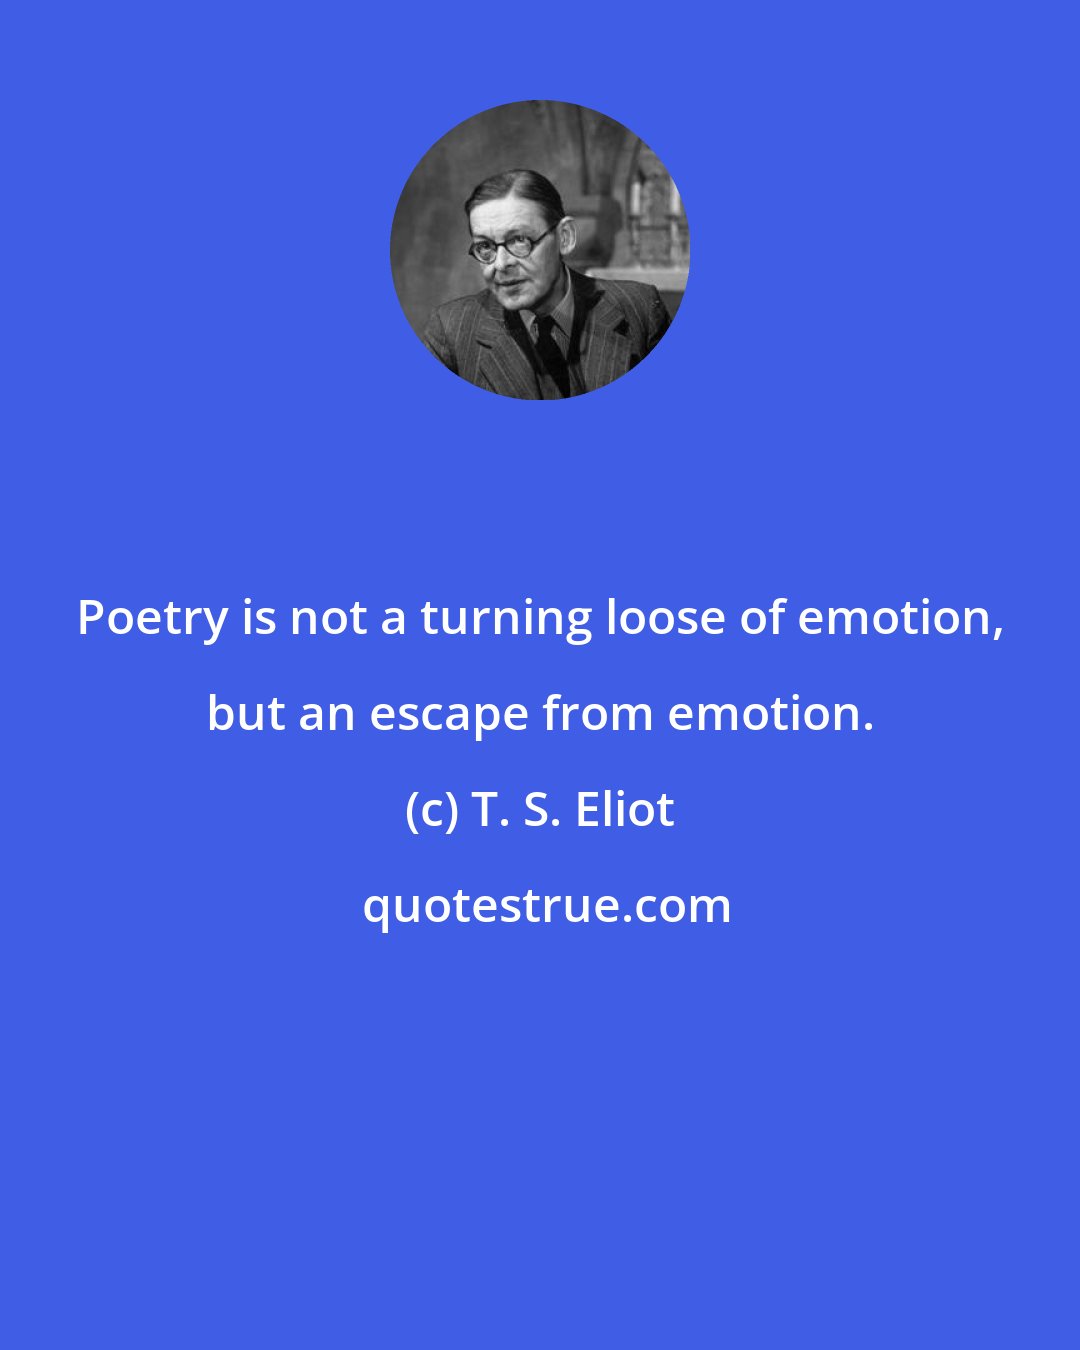 T. S. Eliot: Poetry is not a turning loose of emotion, but an escape from emotion.